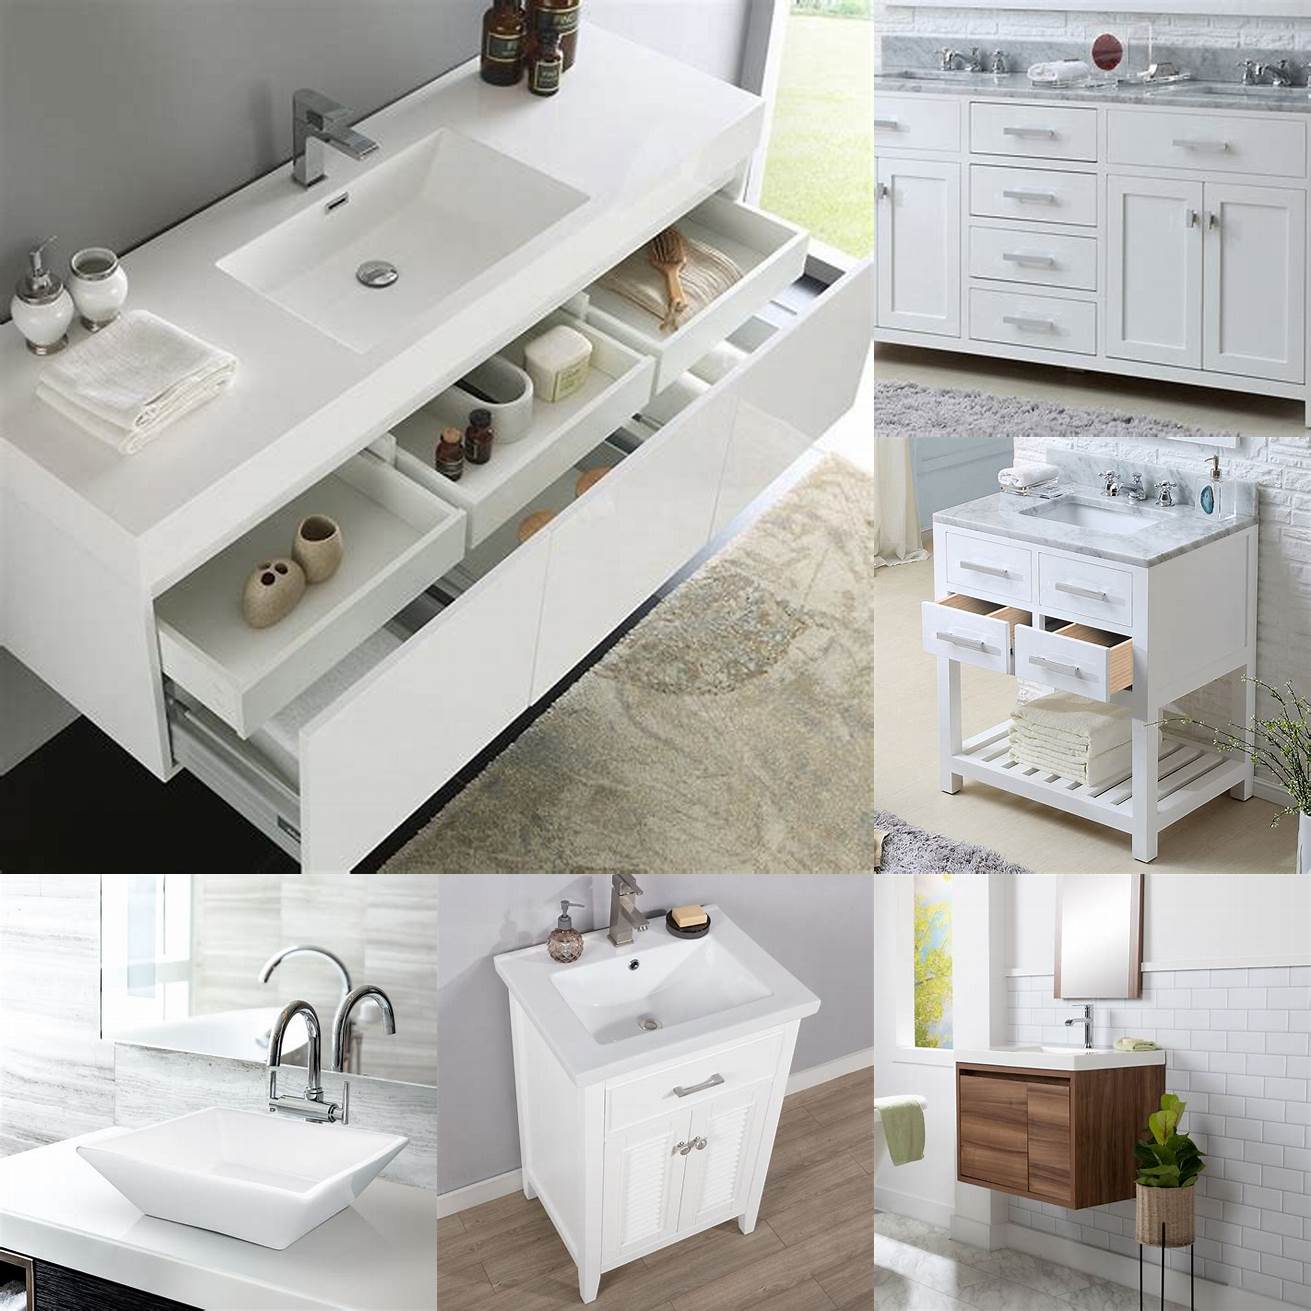 A white vanity with a built-in sink and sleek modern hardware